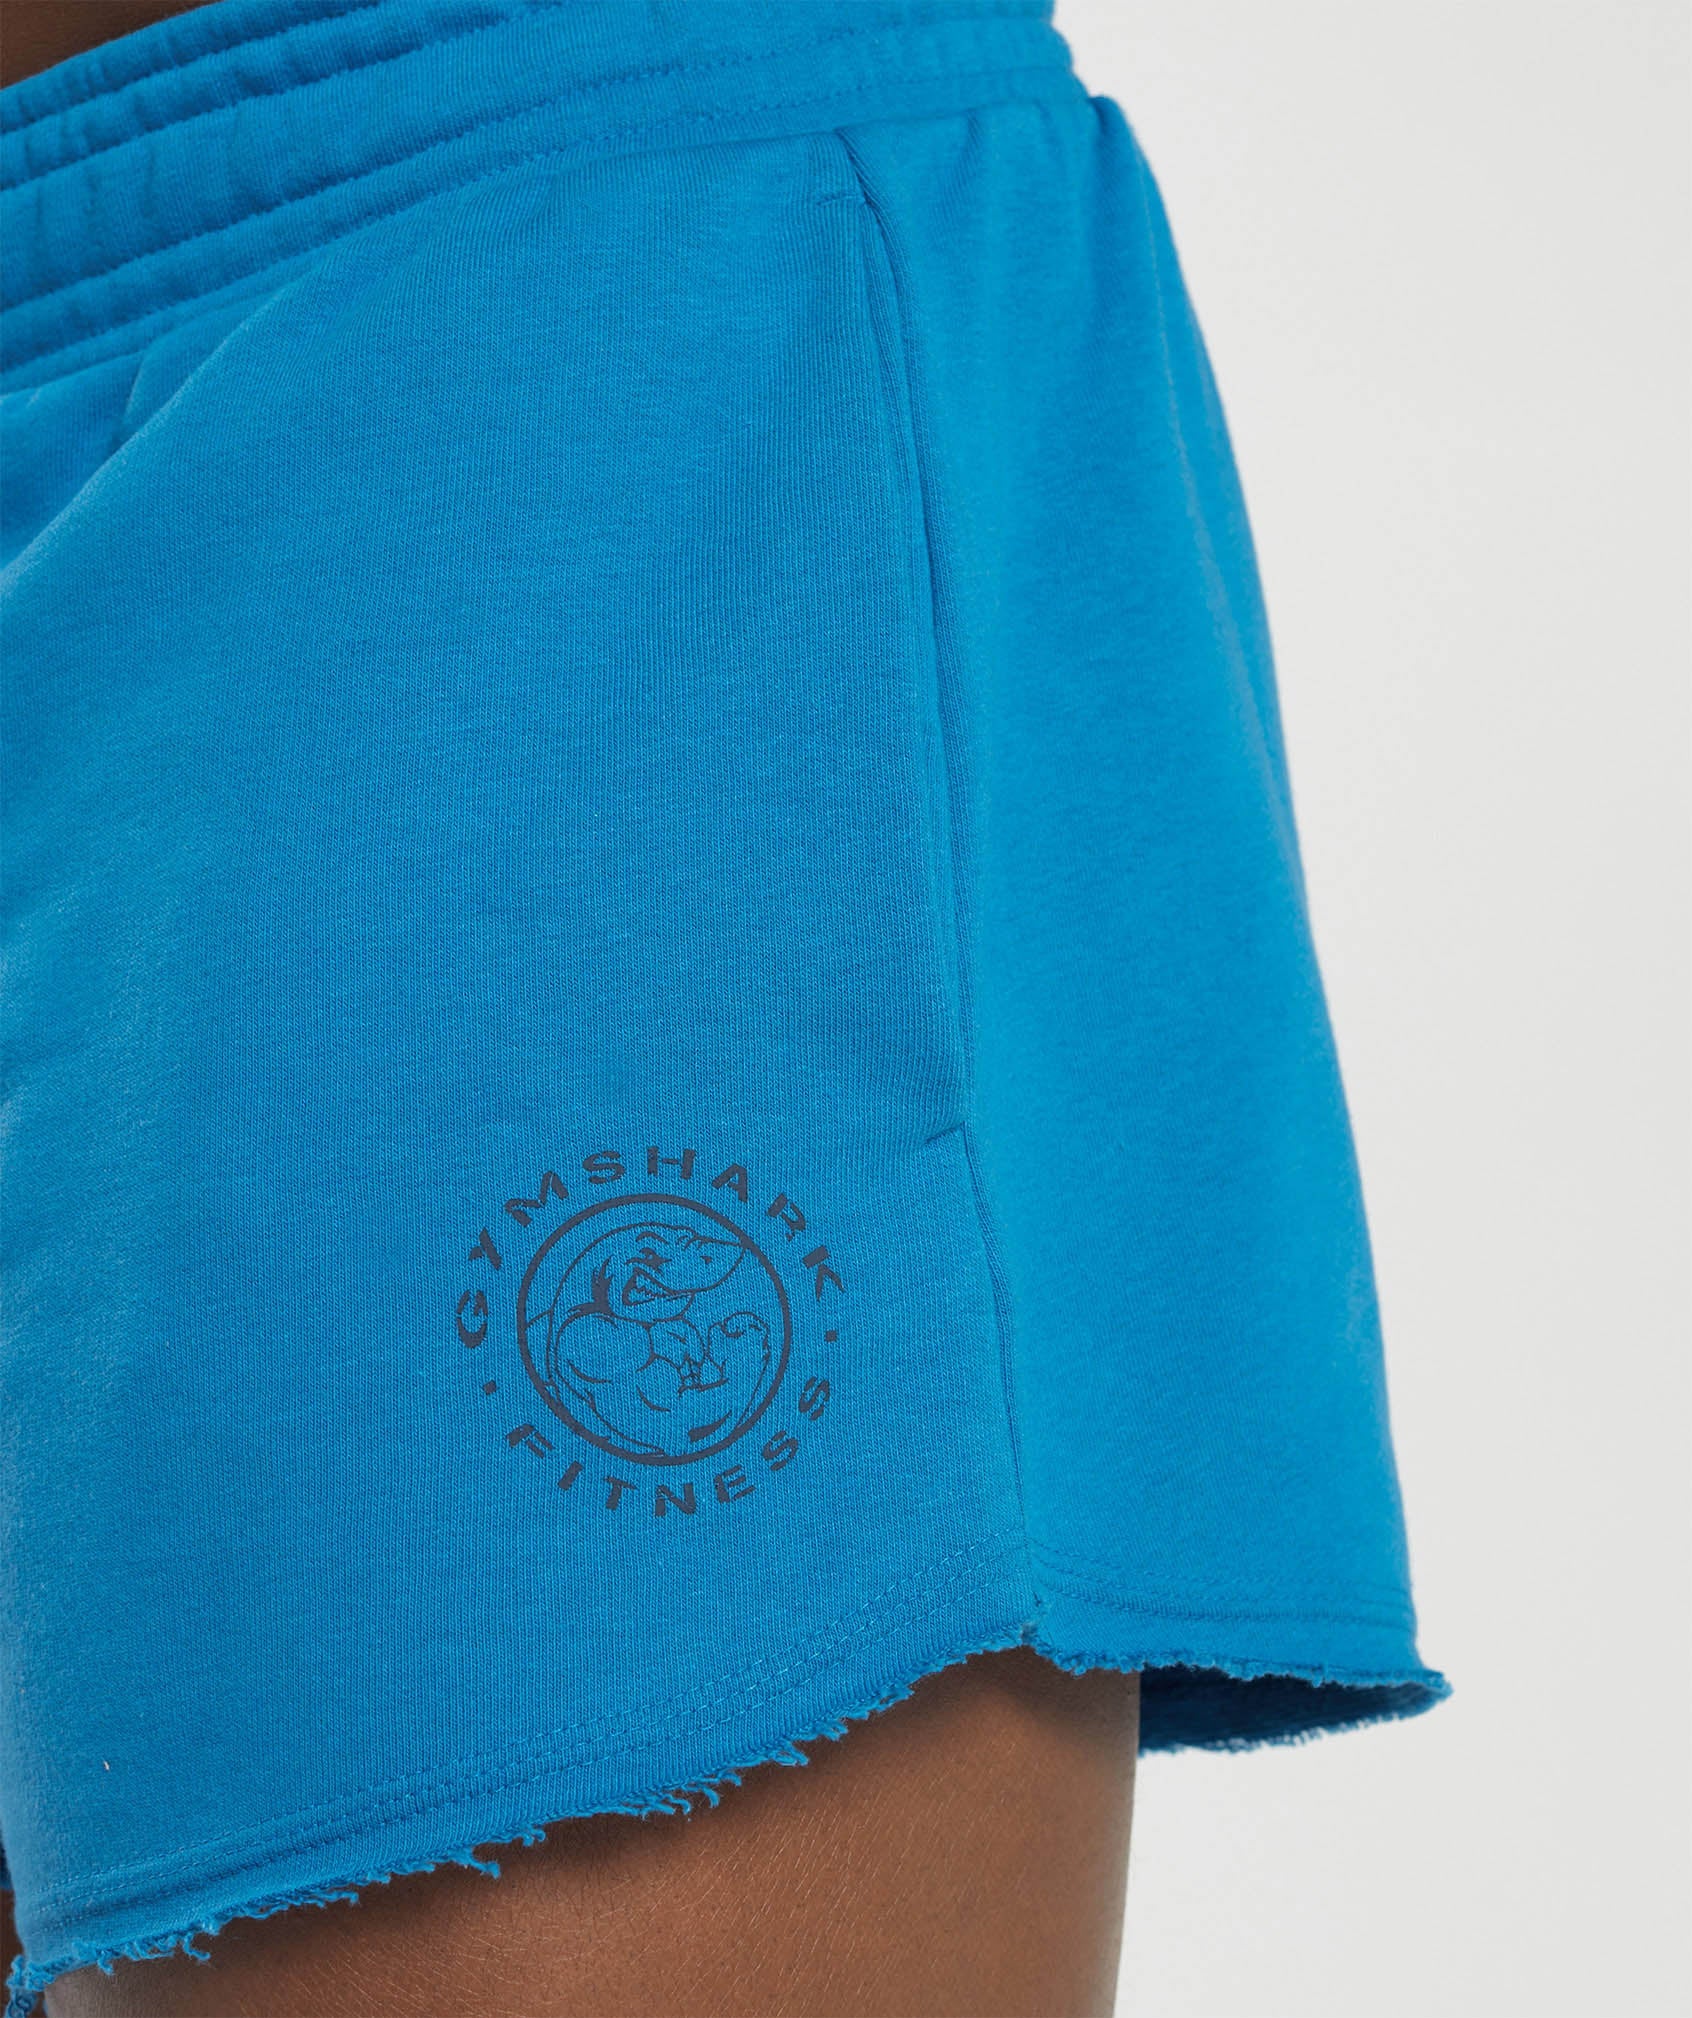 Legacy 4" Shorts in Retro Blue - view 5